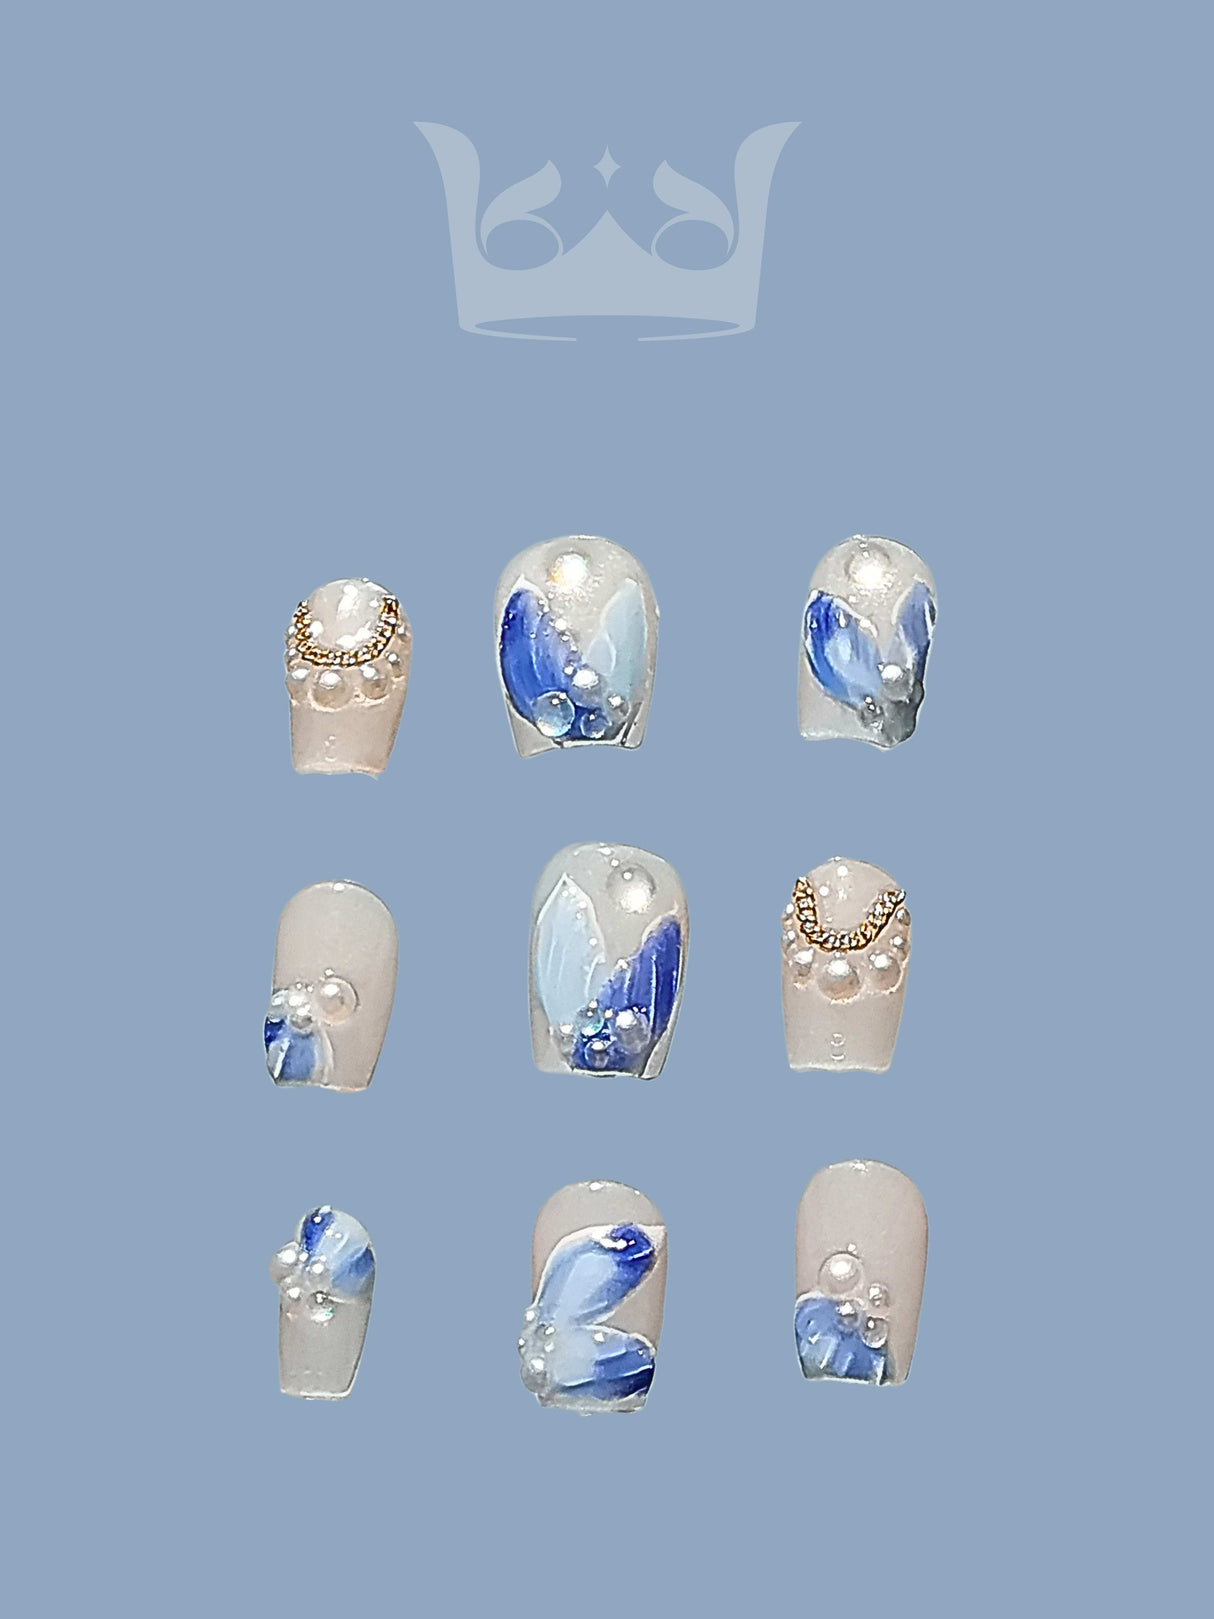 These press-on nails are for nail art with solid color backgrounds, marble-like patterns in blue and white, small gems, rhinestones, pearls, and a glossy finish. 